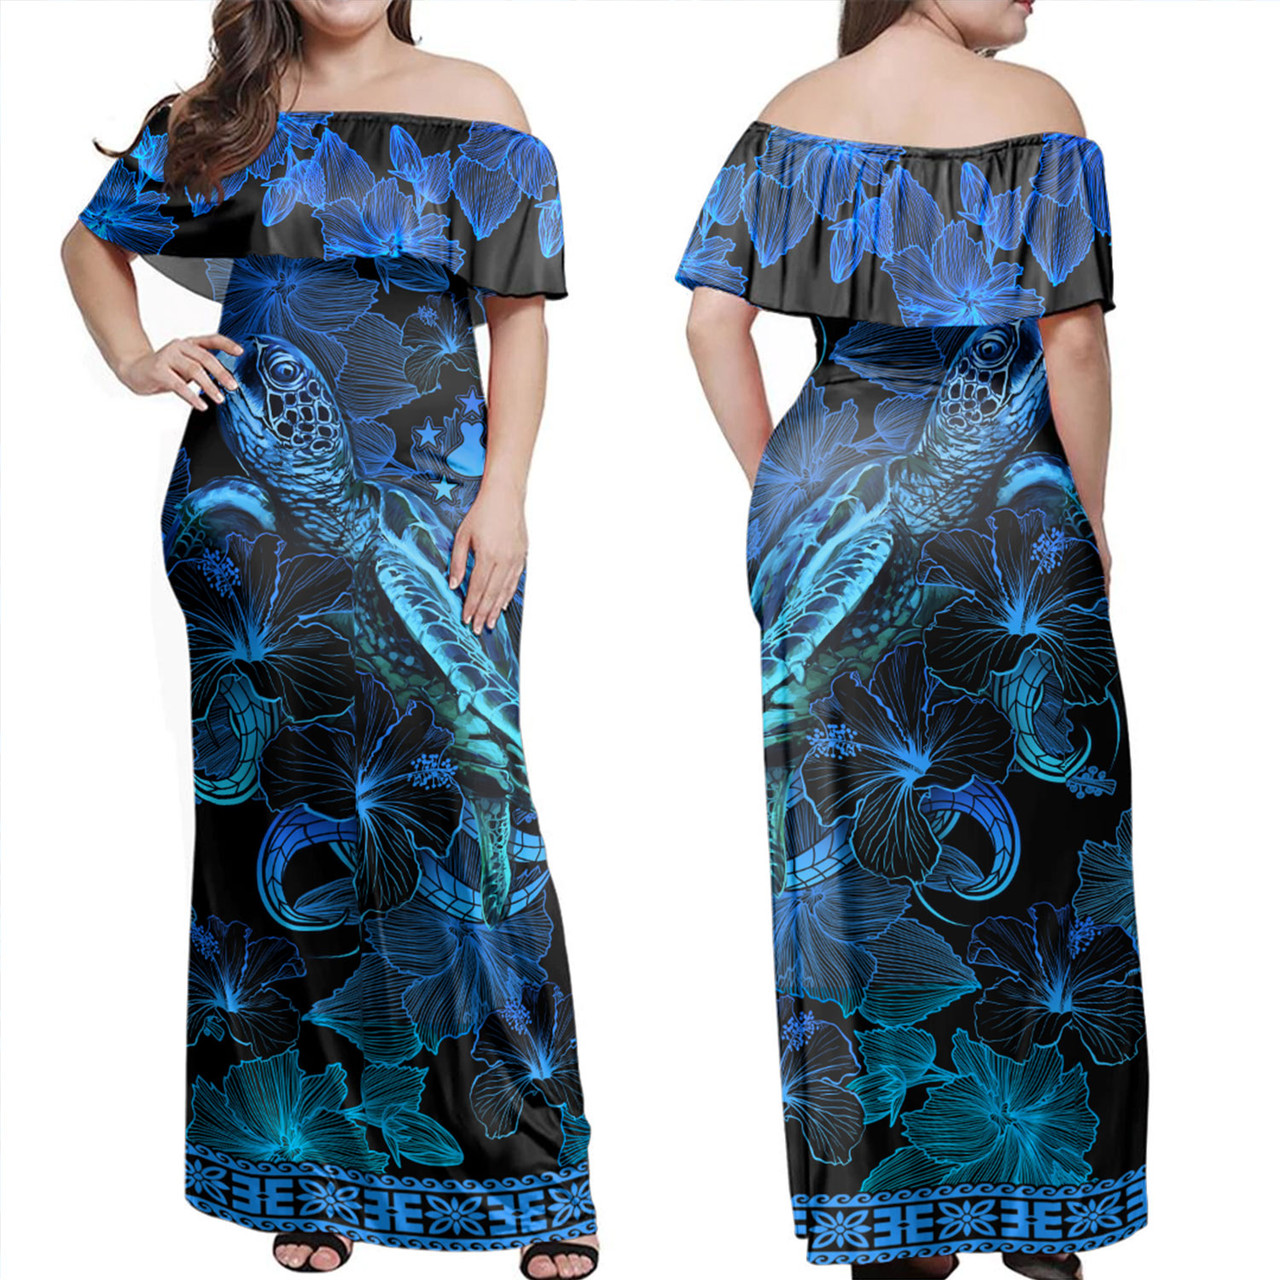 Austral Islands Combo Off Shoulder Long Dress And Shirt Sea Turtle With Blooming Hibiscus Flowers Tribal Blue